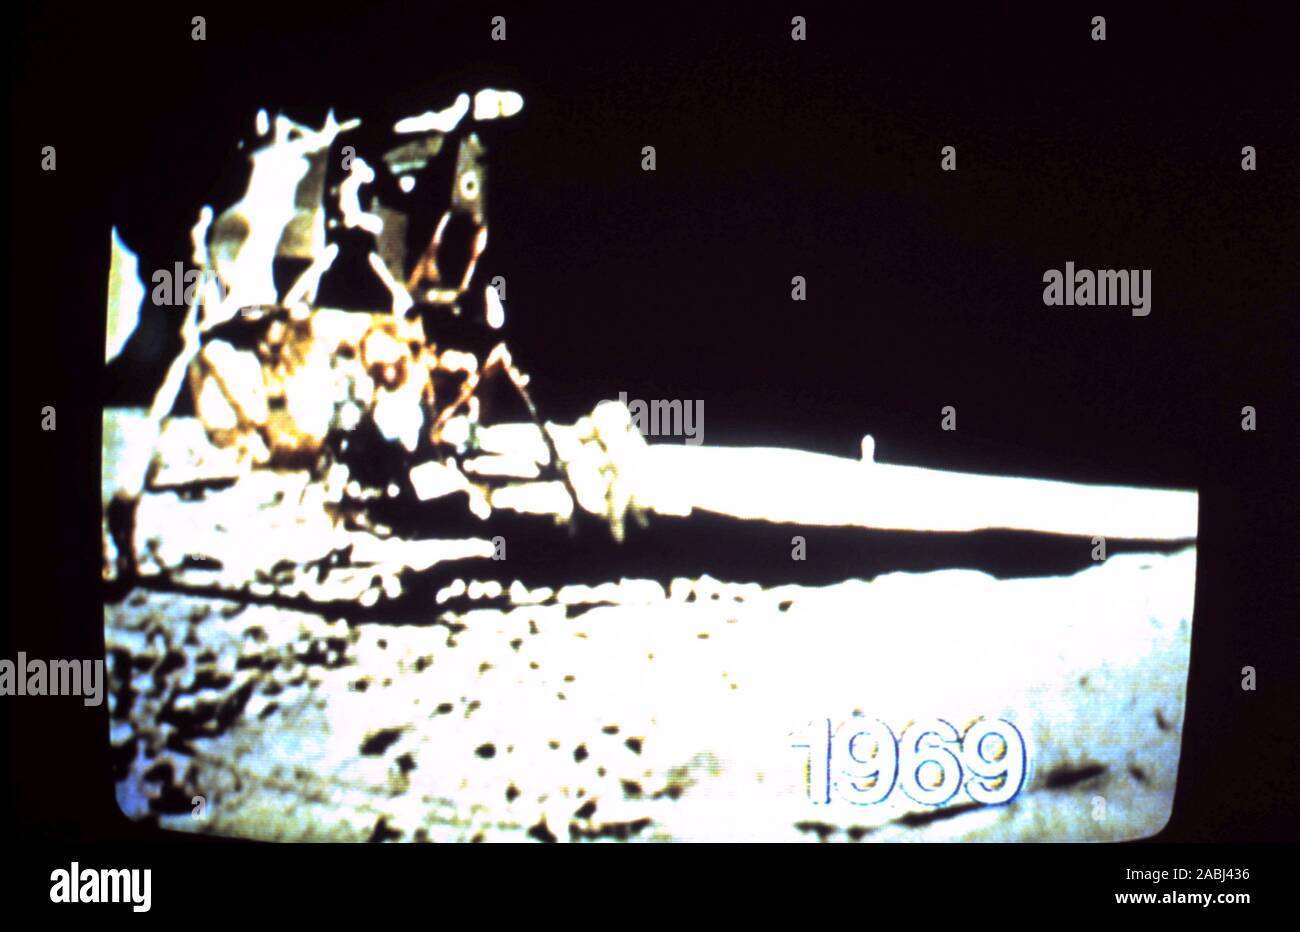 Teleclip - Apollo 11 Buzz Aldrin stepping down onto the Moon's surface the second man on the Moon – shot by Neil Armstrong - photo taken directly from TV screen circa 1969/72 Stock Photo